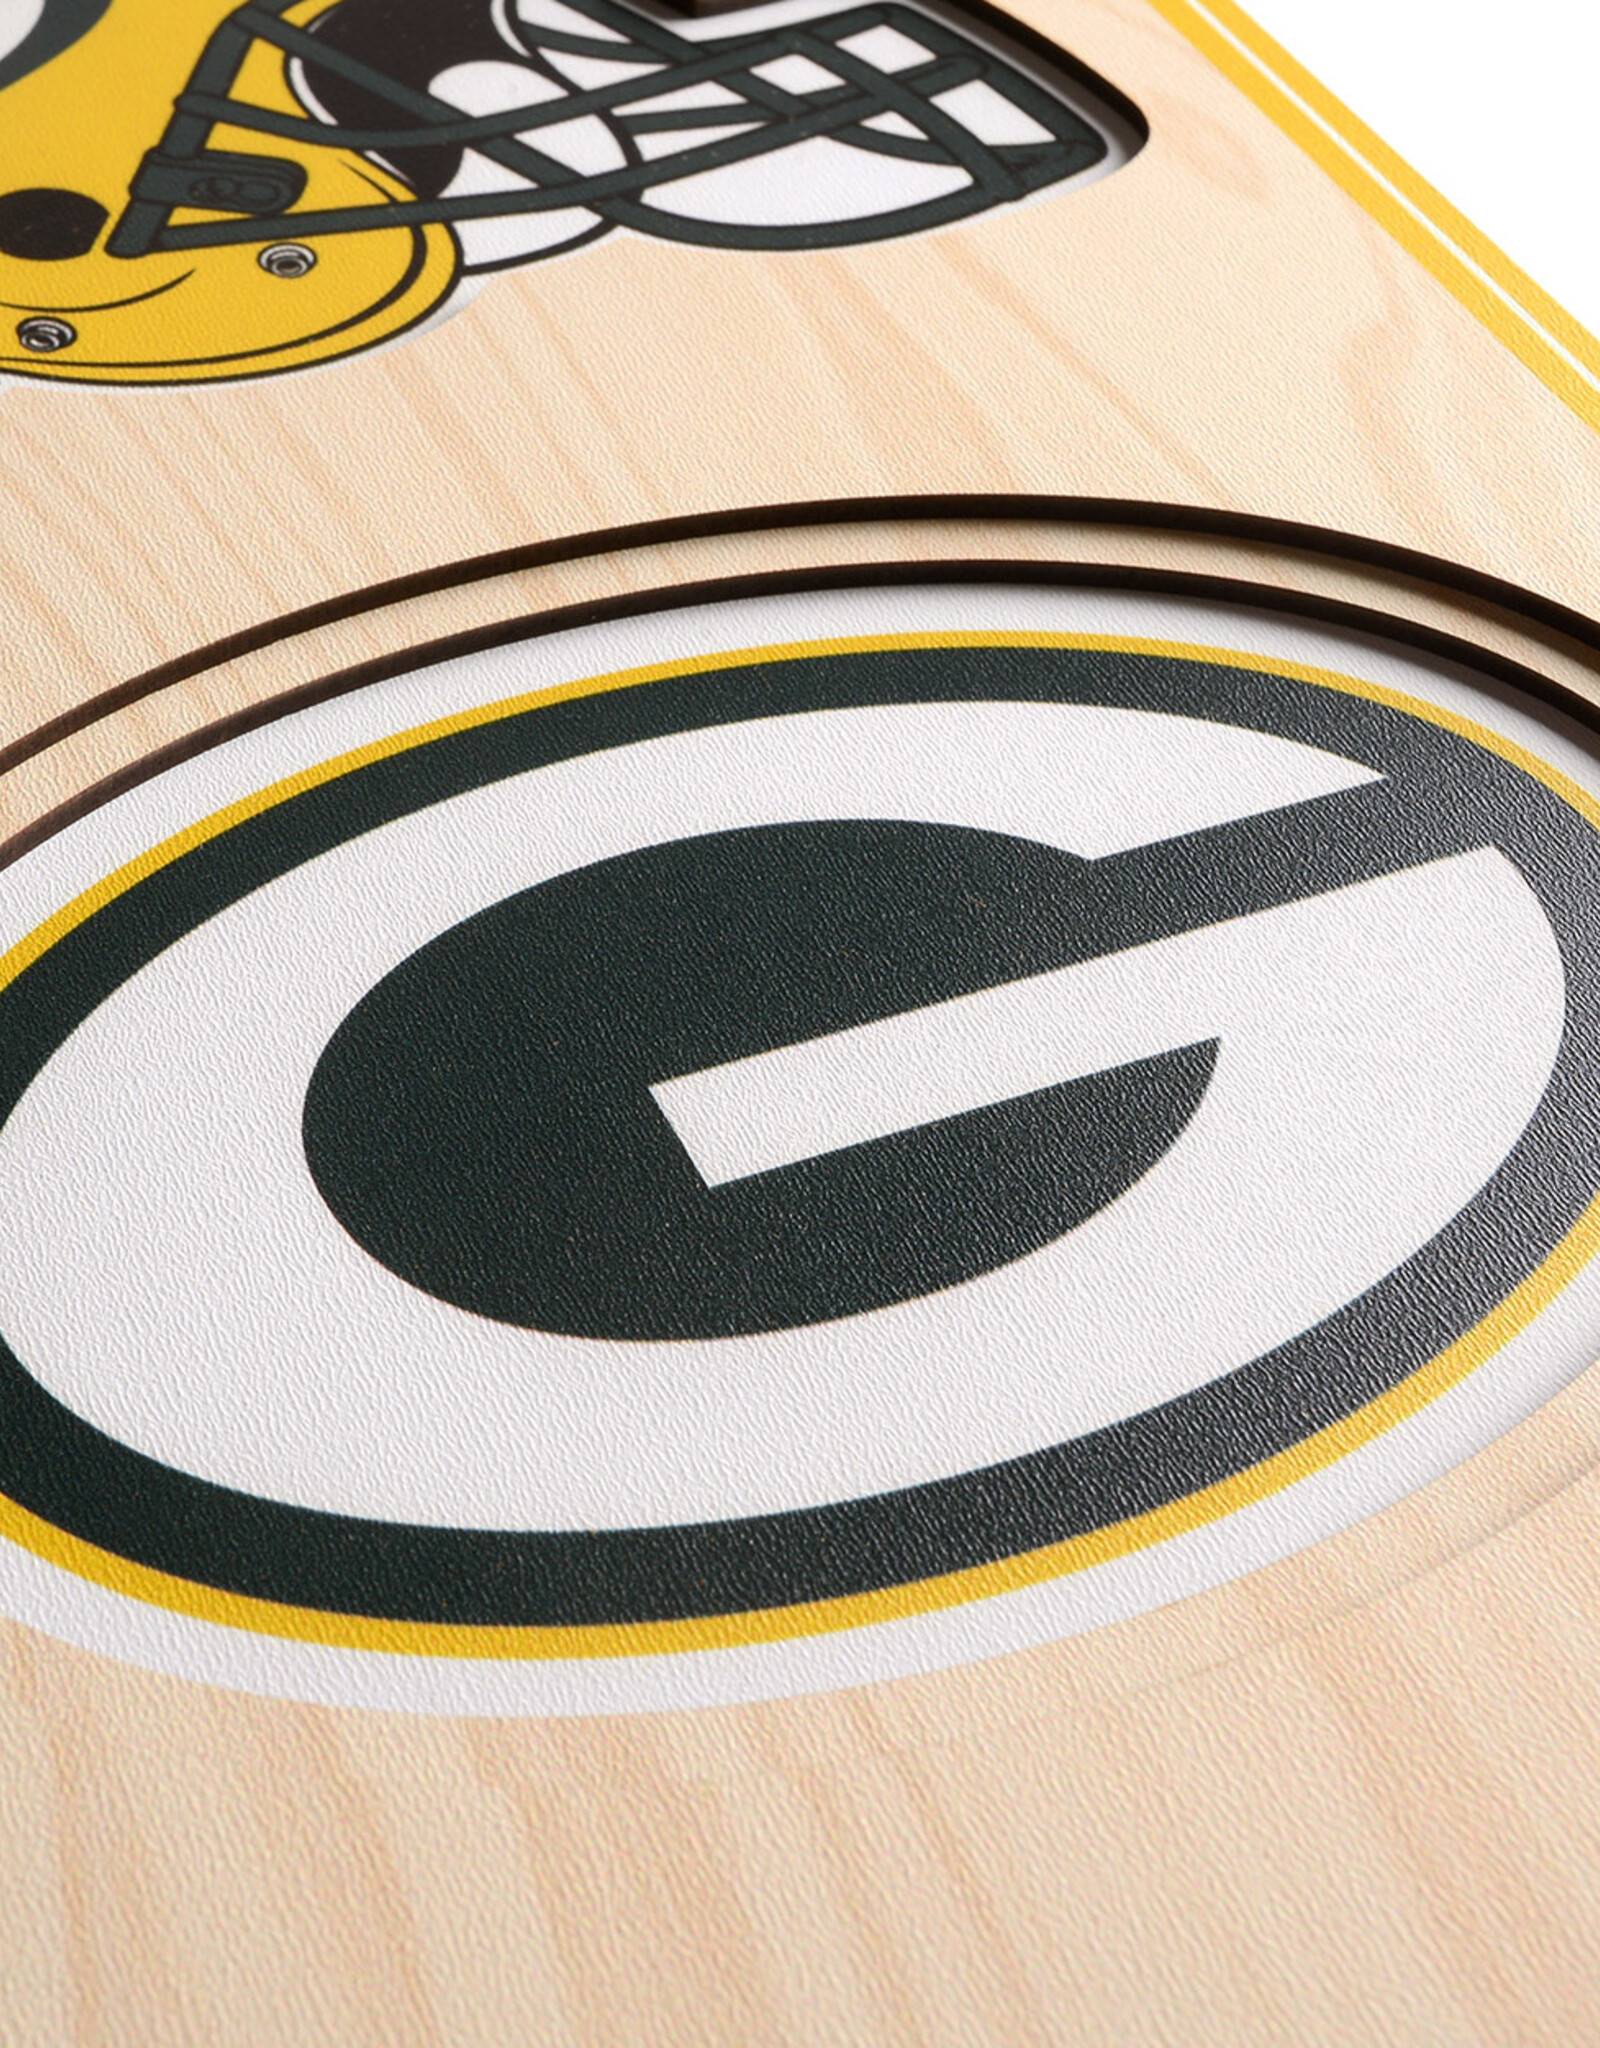 YOU THE FAN Green Bay Packers 3D StadiumView 8x32 Banner